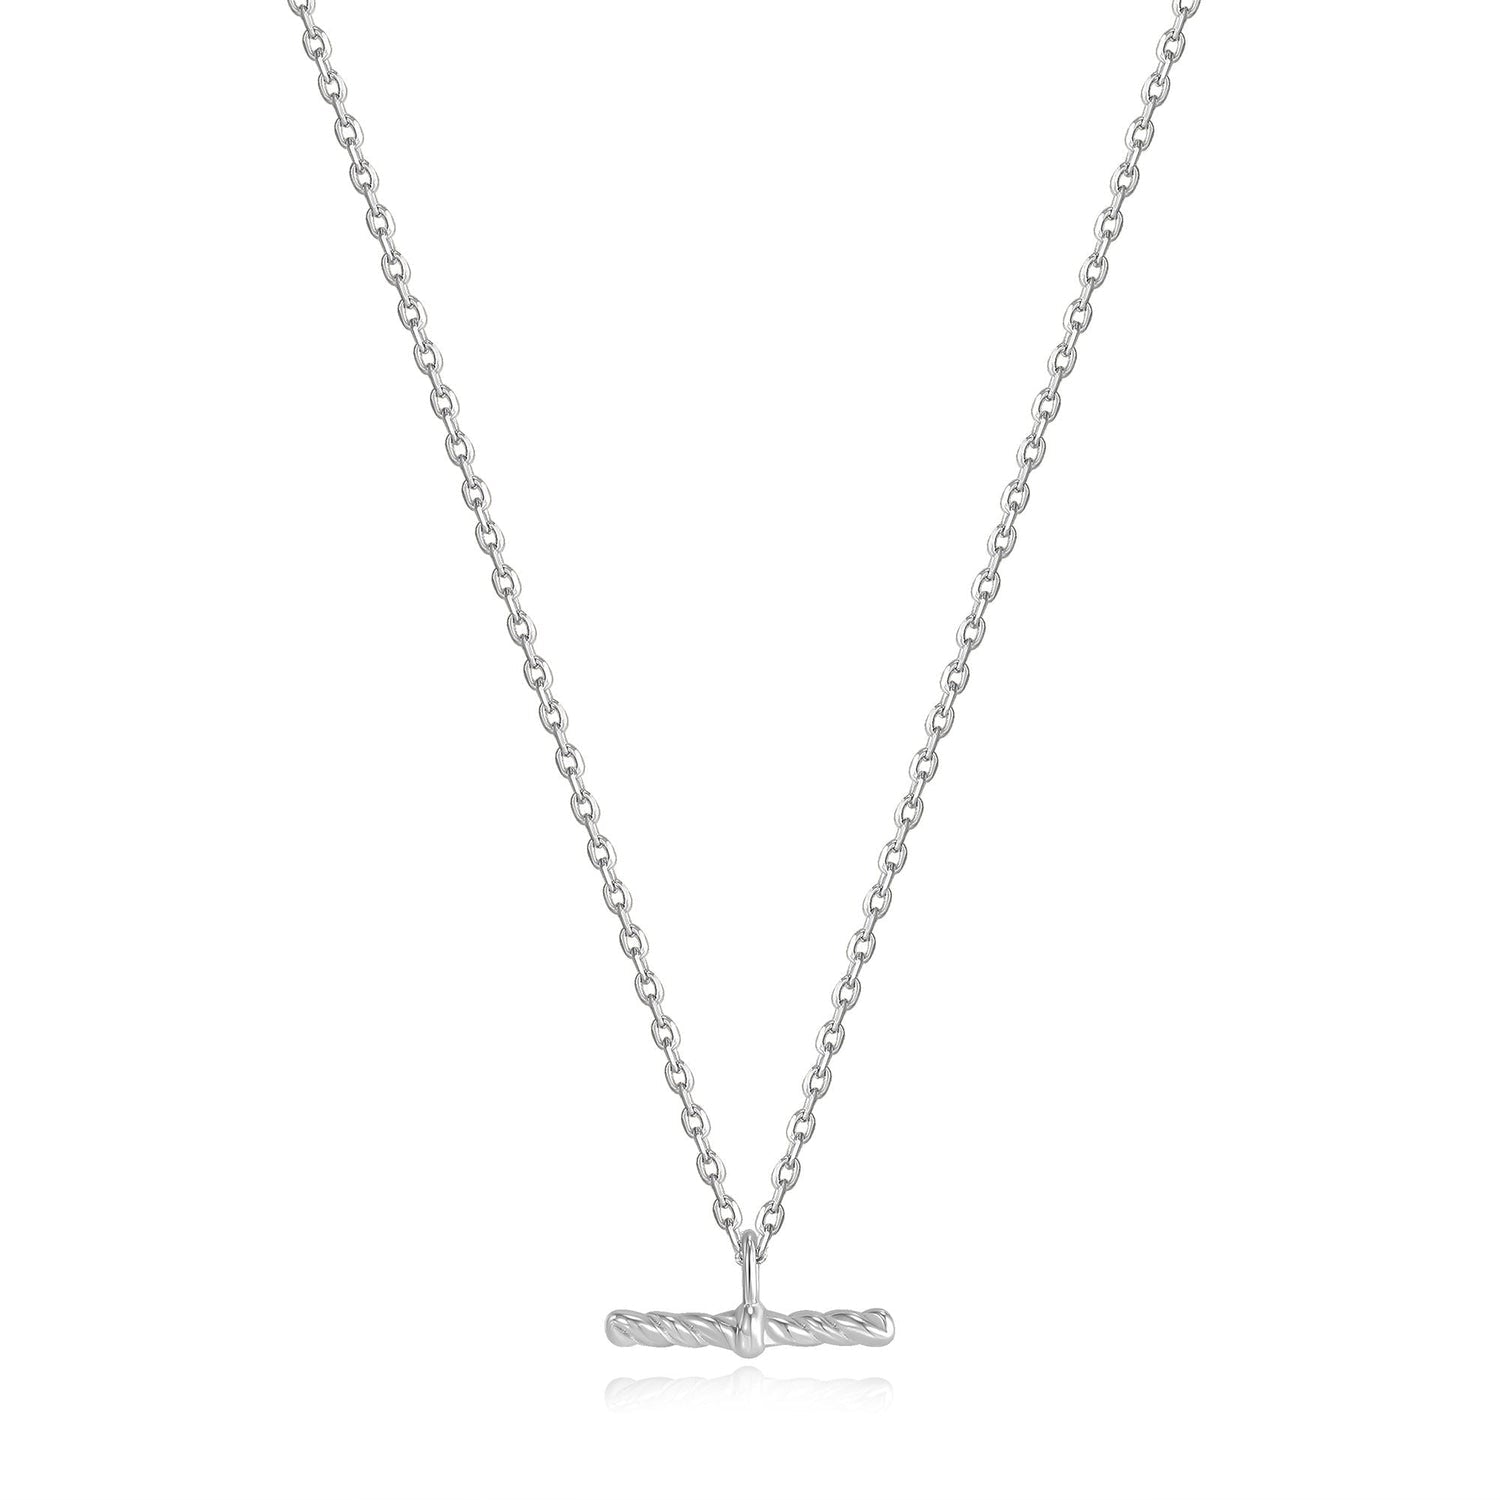 Ania Haie Ropes & Dreams - Rope T-Bar Necklace